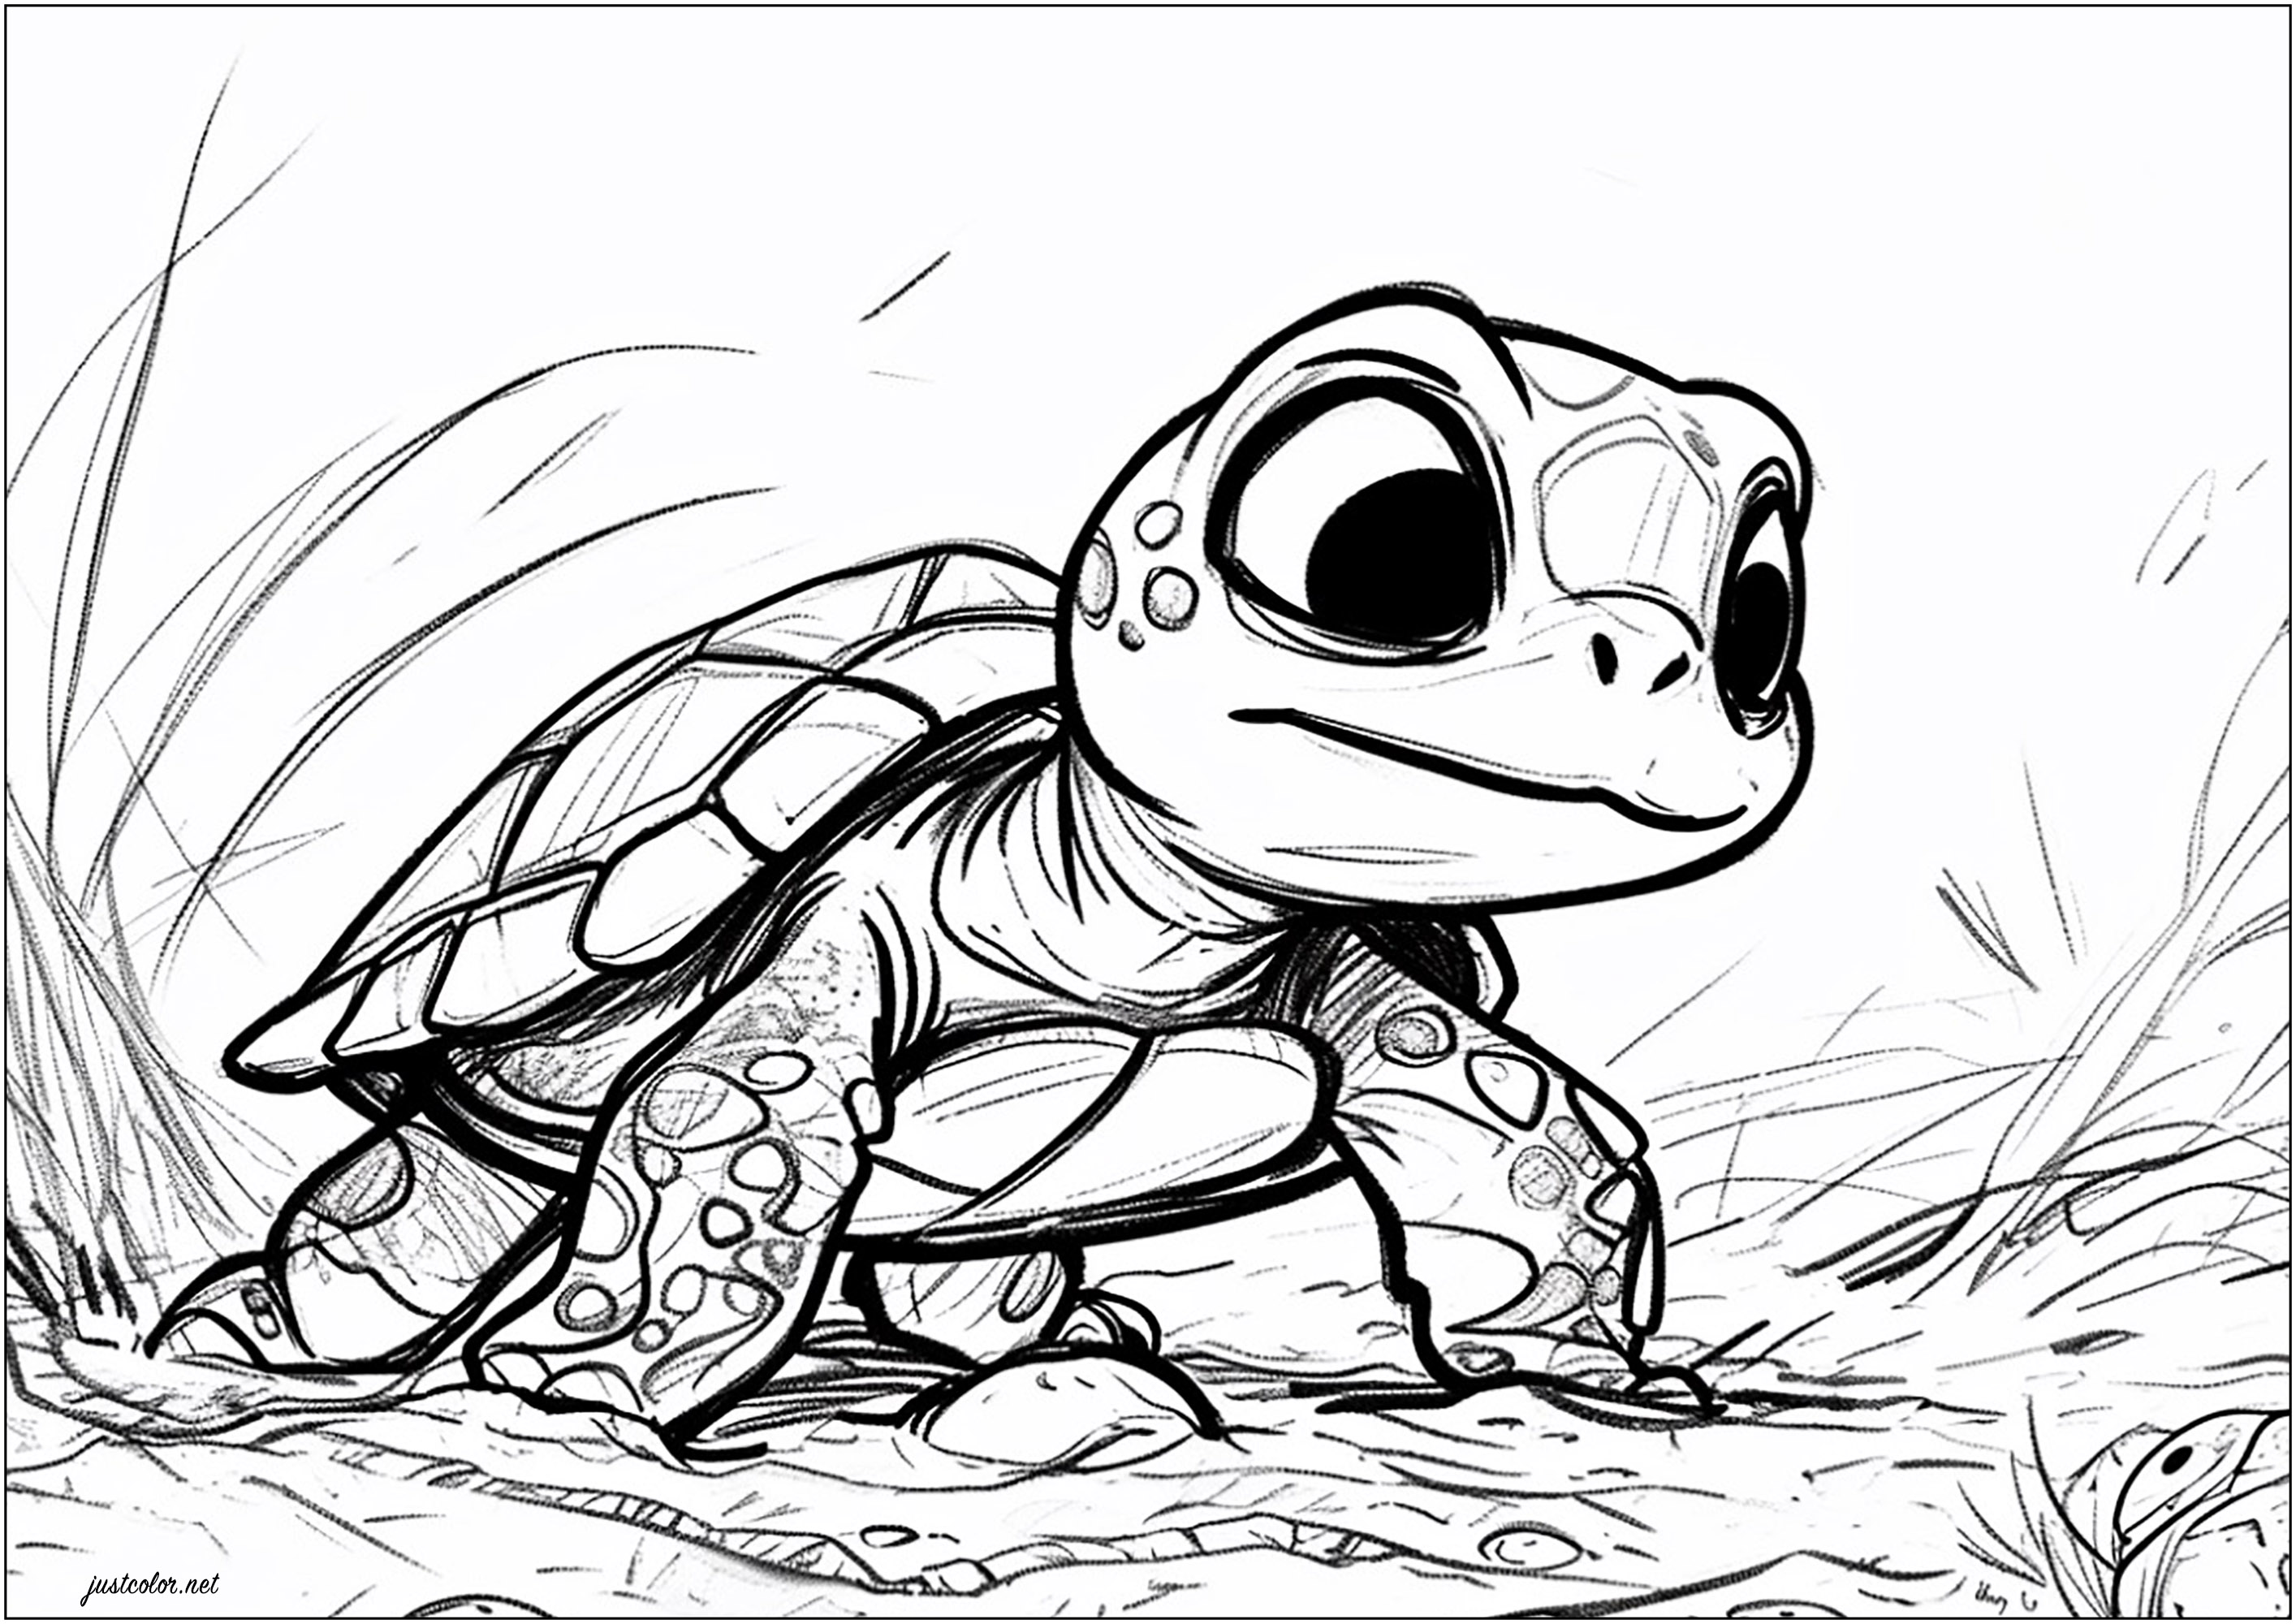 Funny Turtles coloring page for children